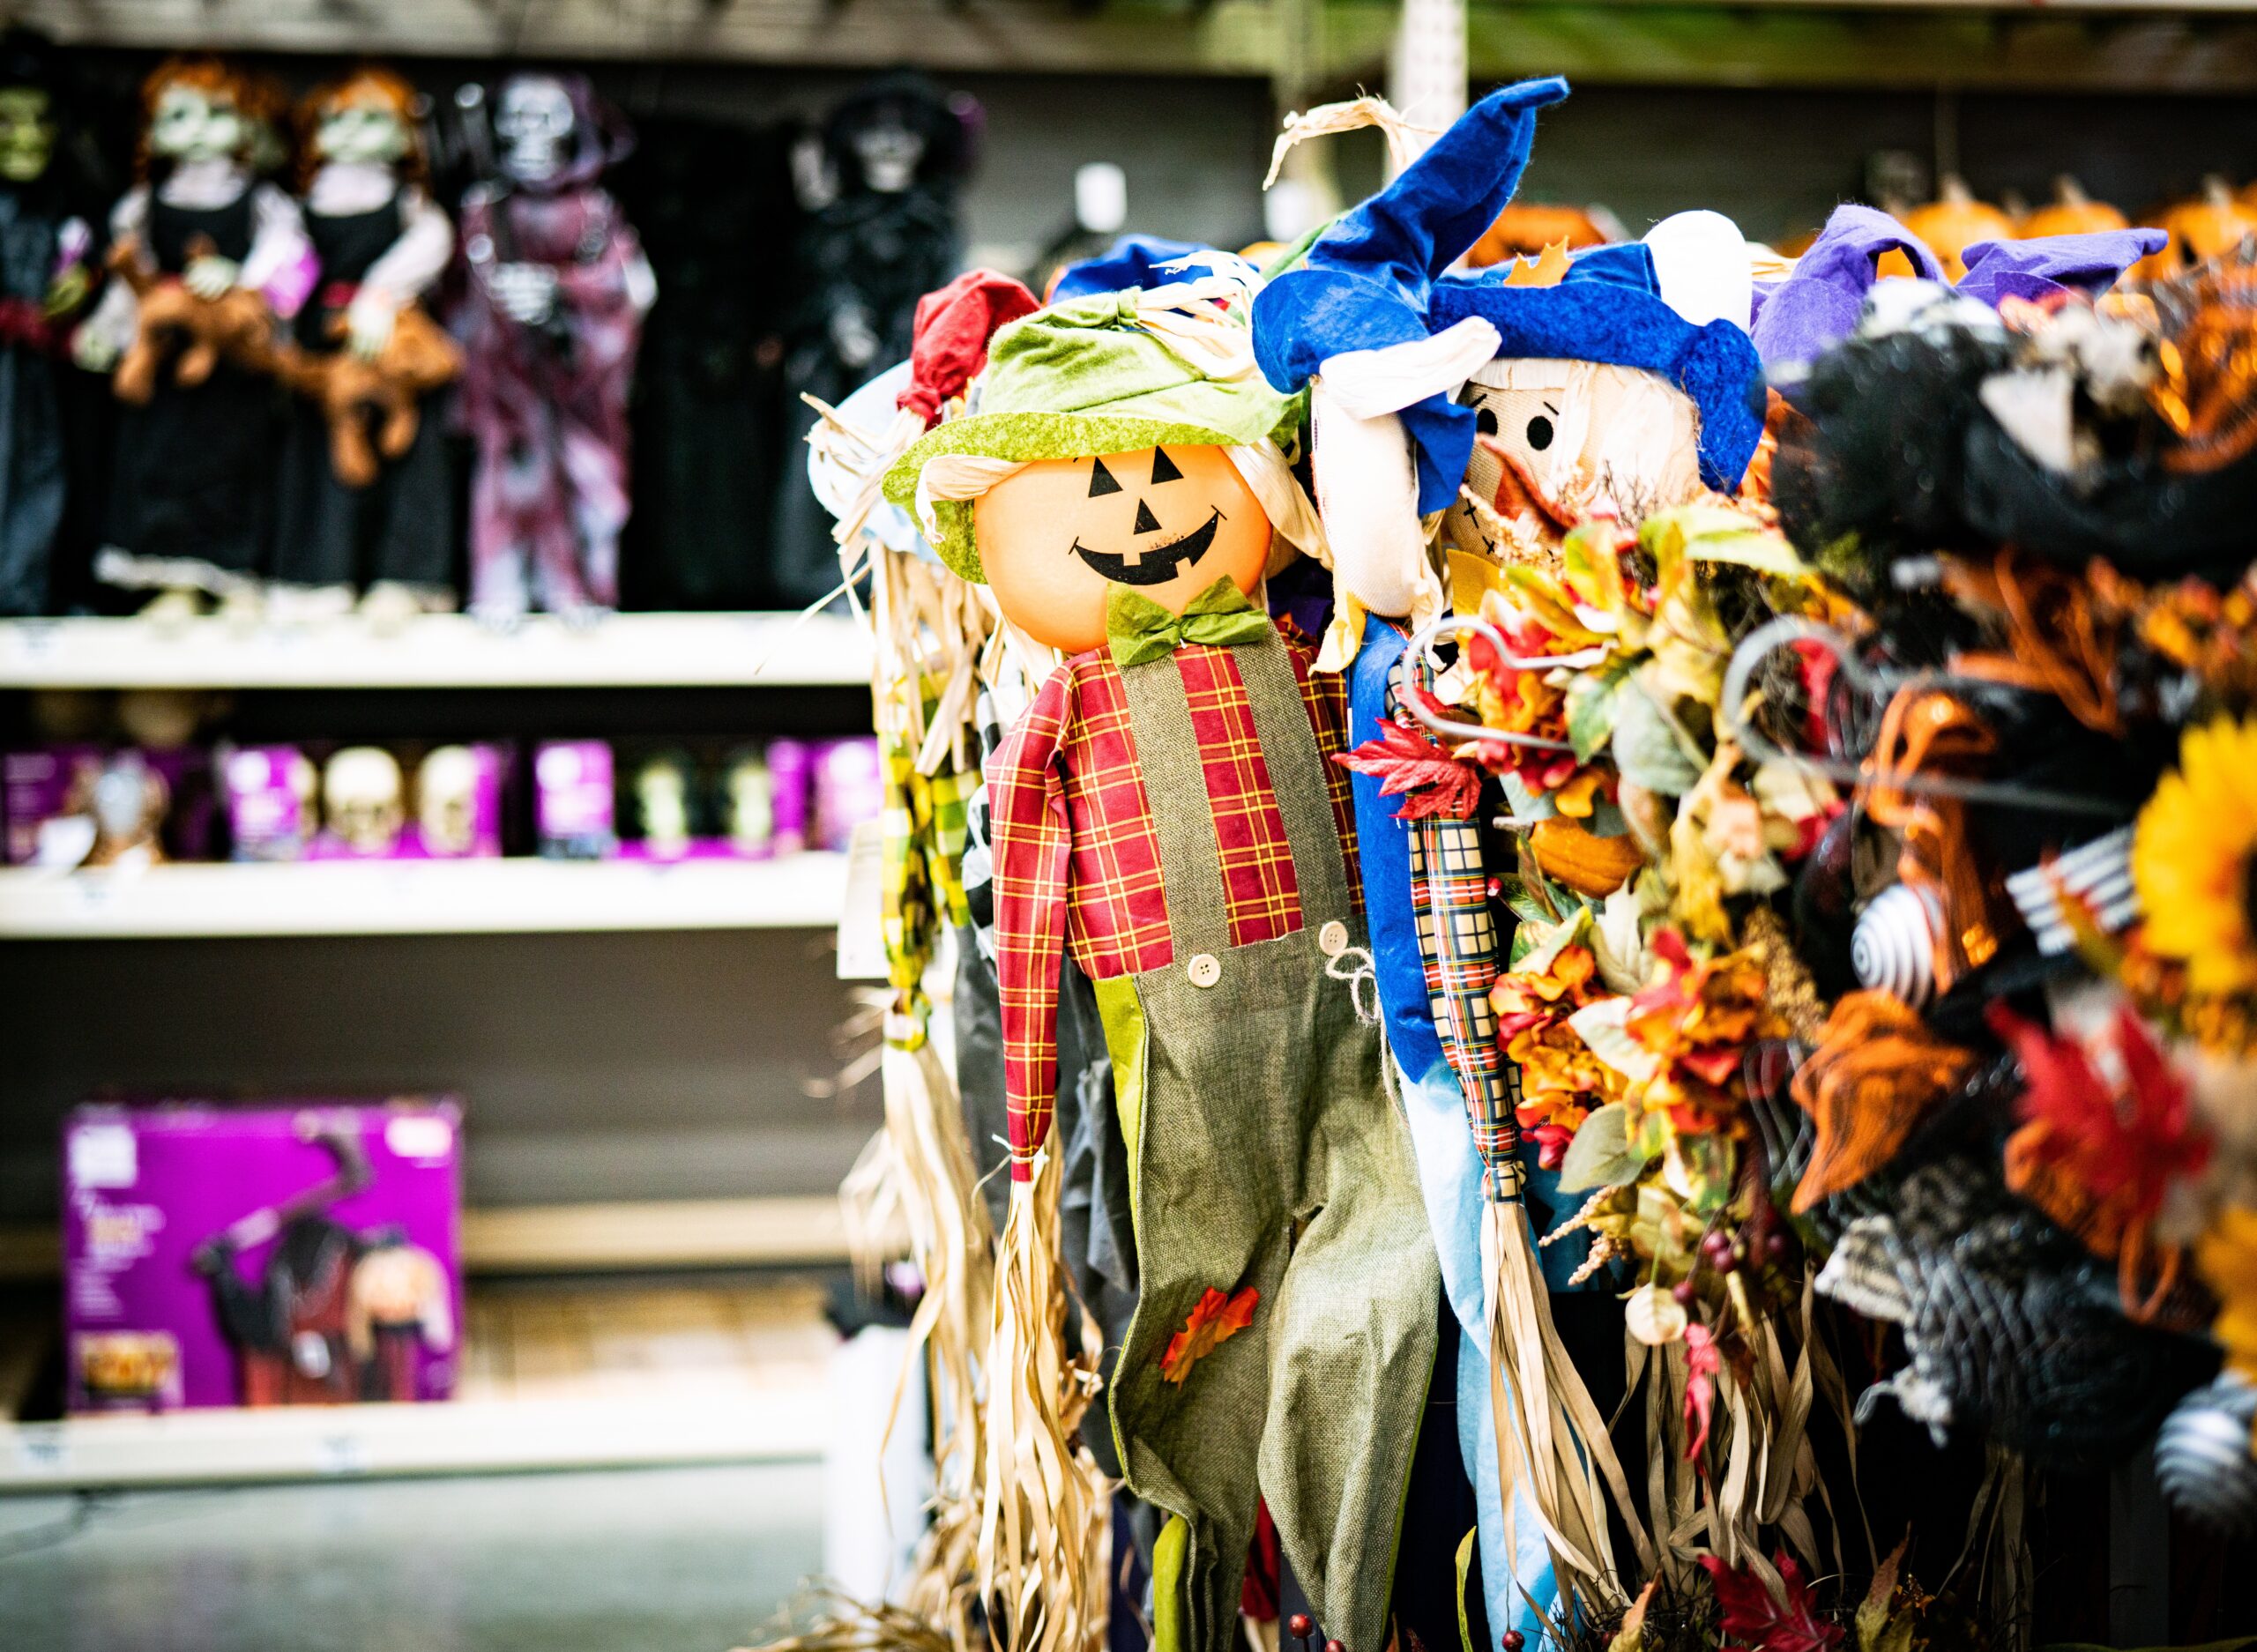 Halloween scarecrows in a retail store